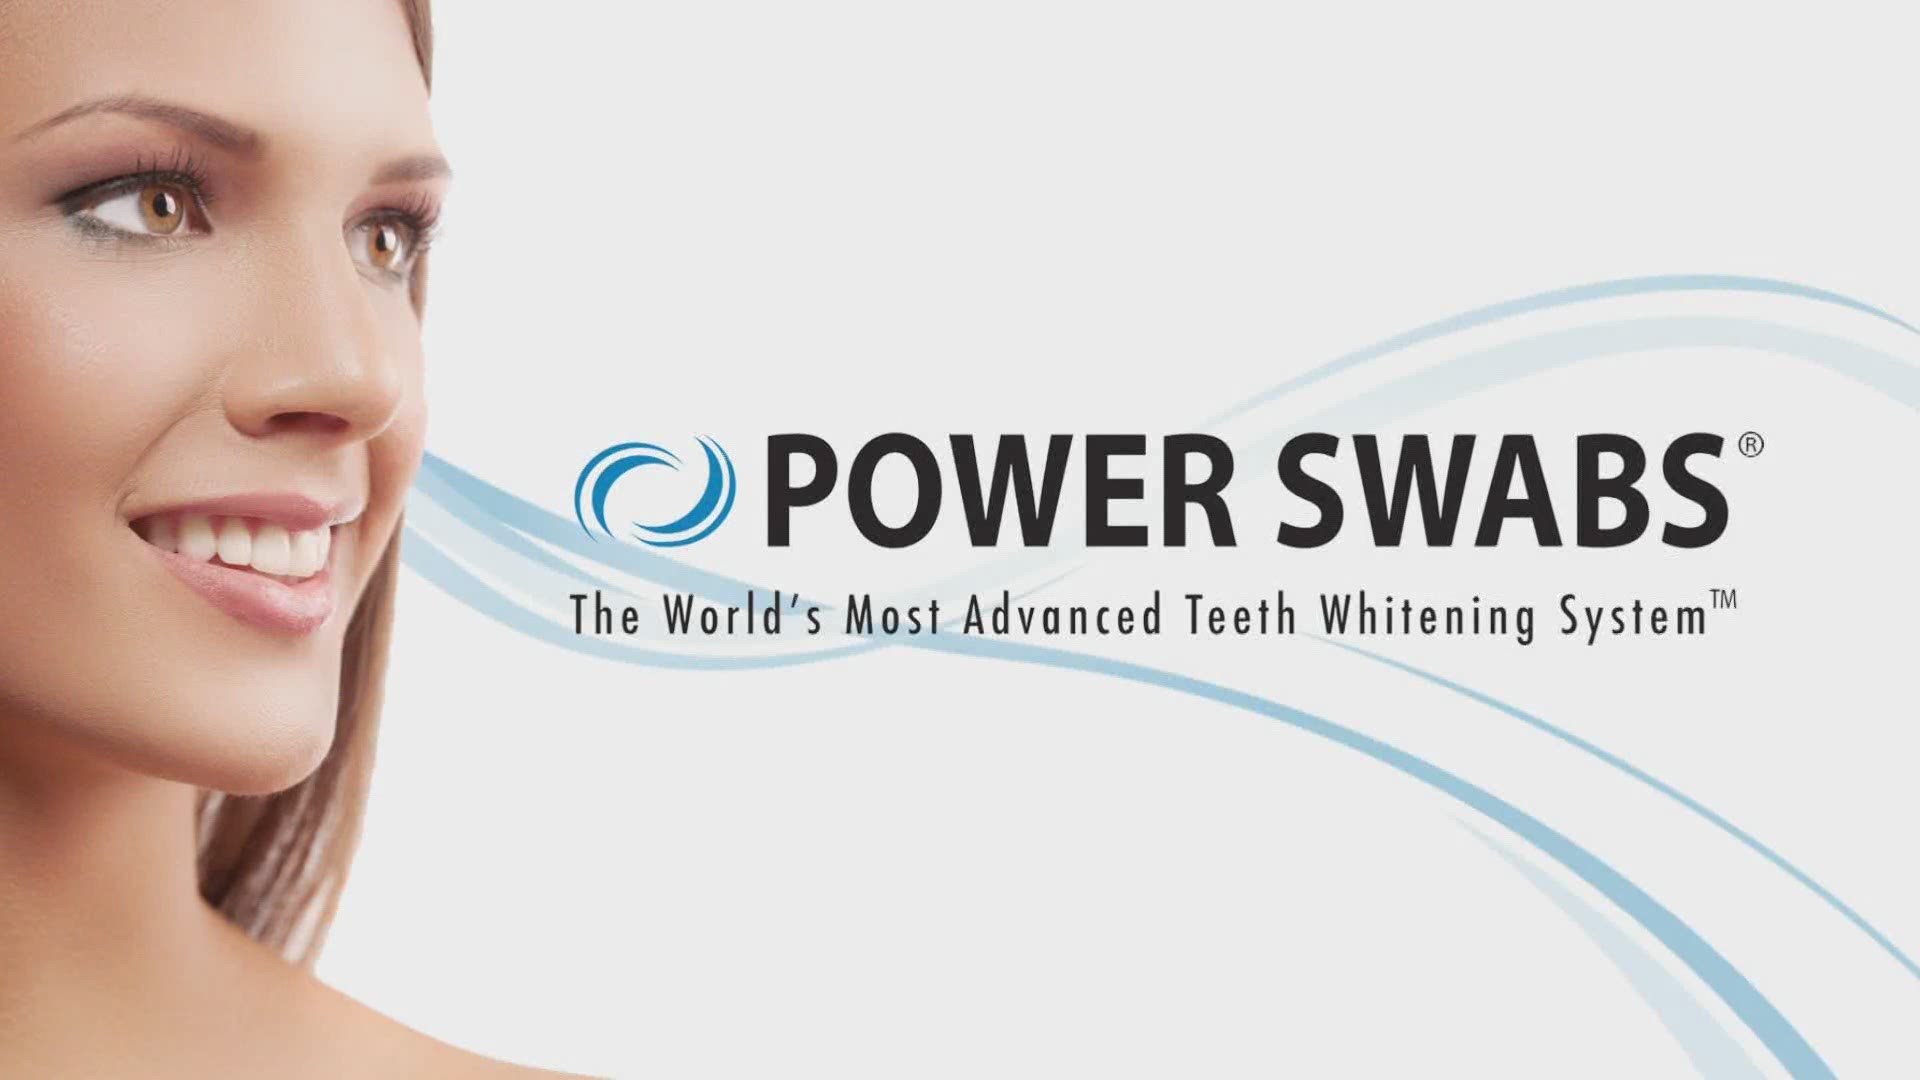 Get that whiter, brighter smile you’ve always wanted with Power Swabs.